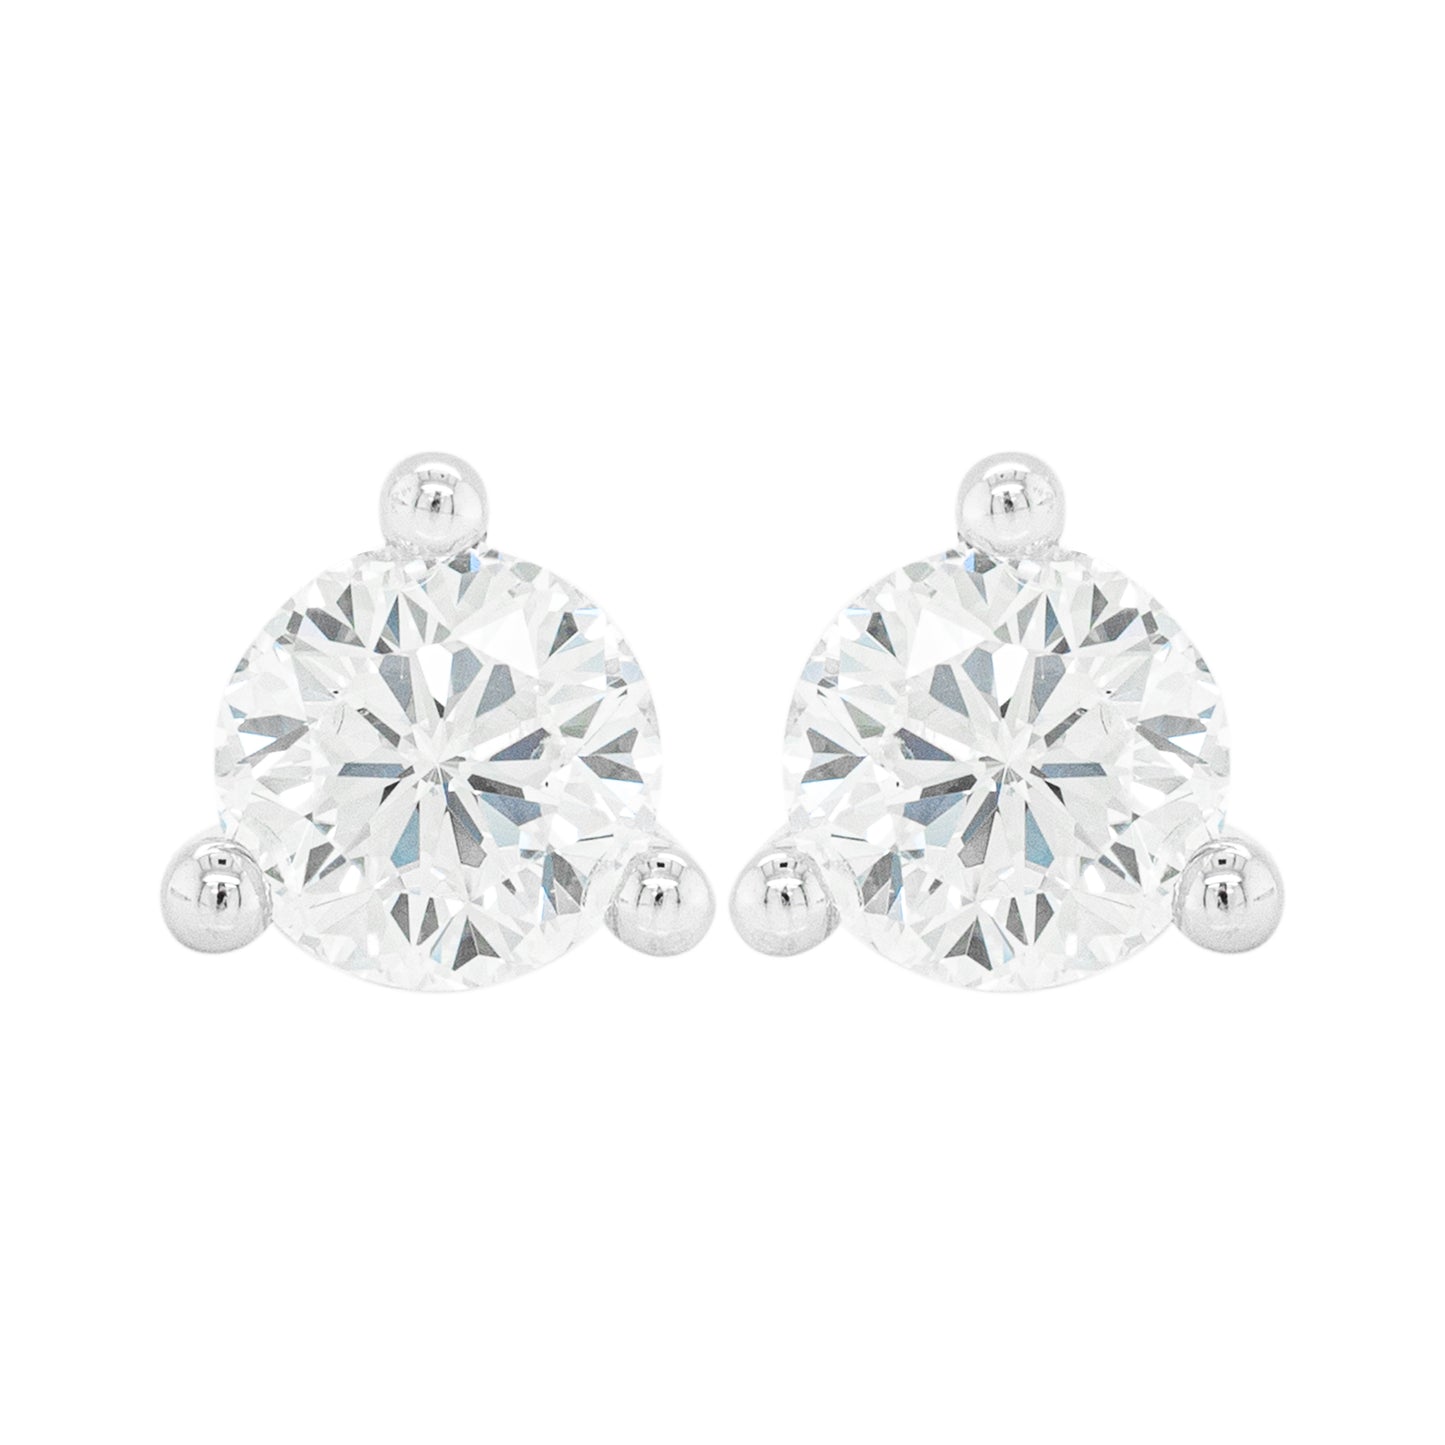 1.06ct F VS1 Roberto Coin Cento Collection Diamond 18 Carat Gold Stud Earrings